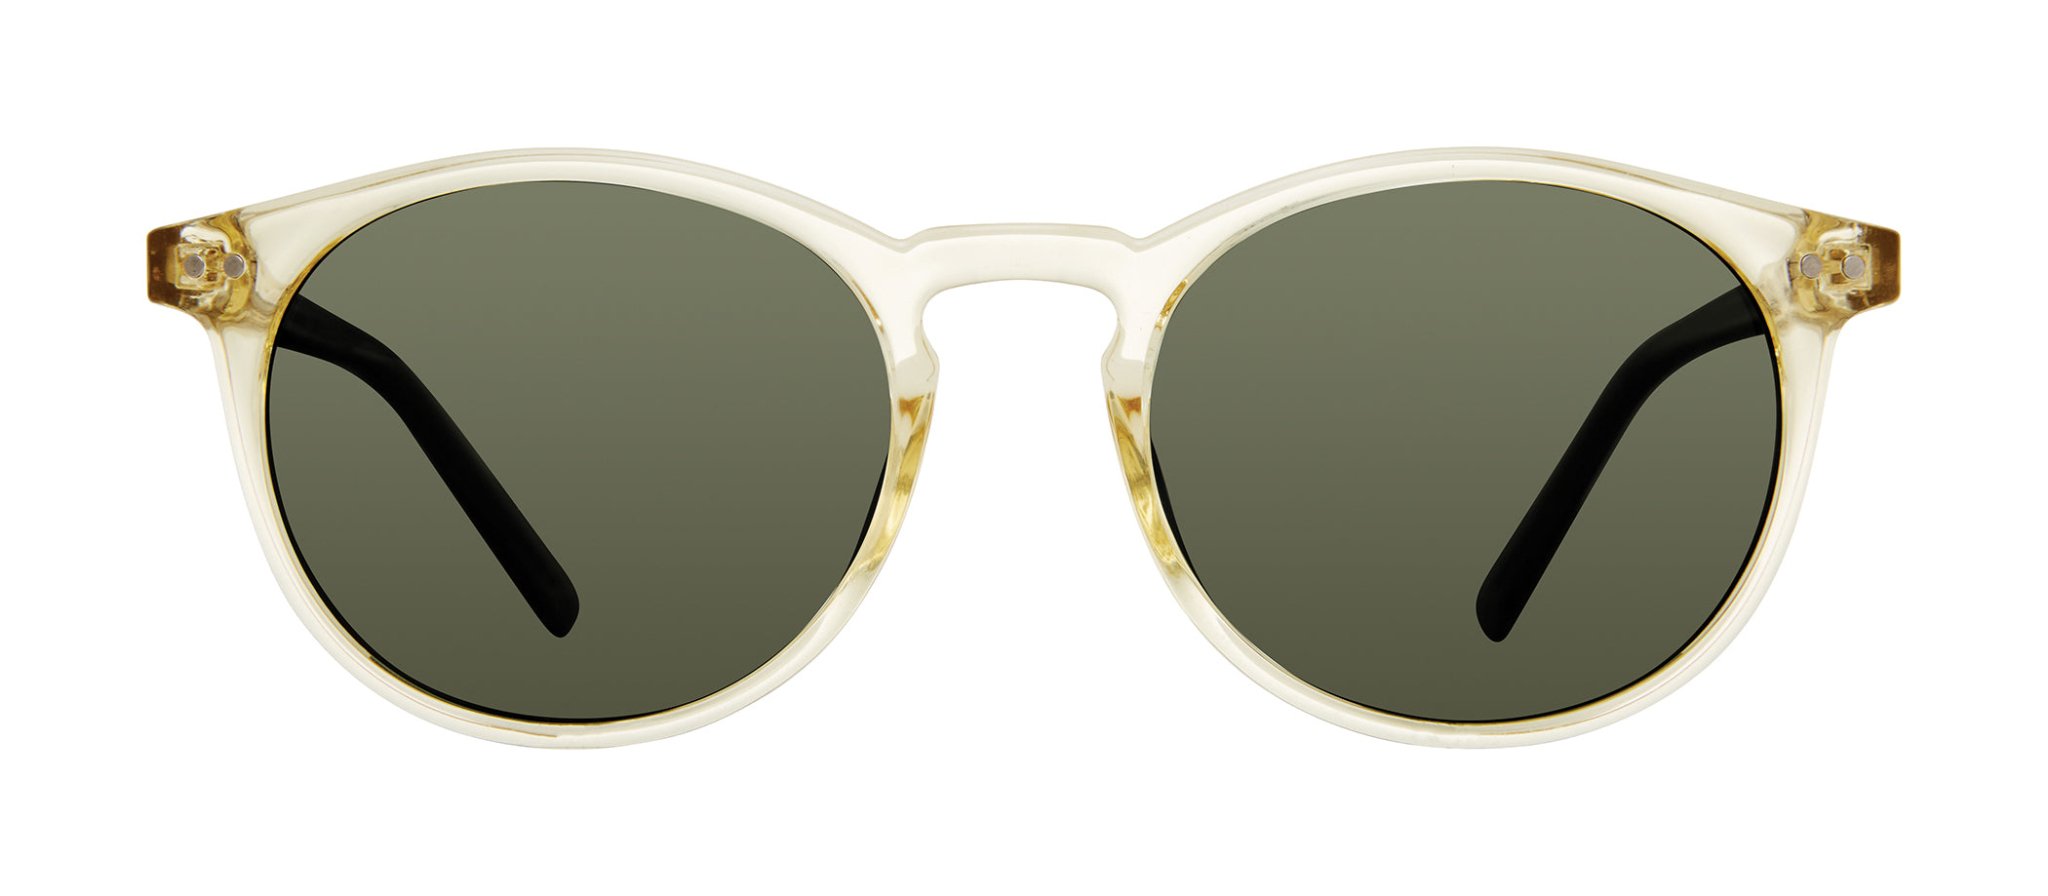 Crystal Yellow/Green | Privé Revaux The Maestro X Sunglasses